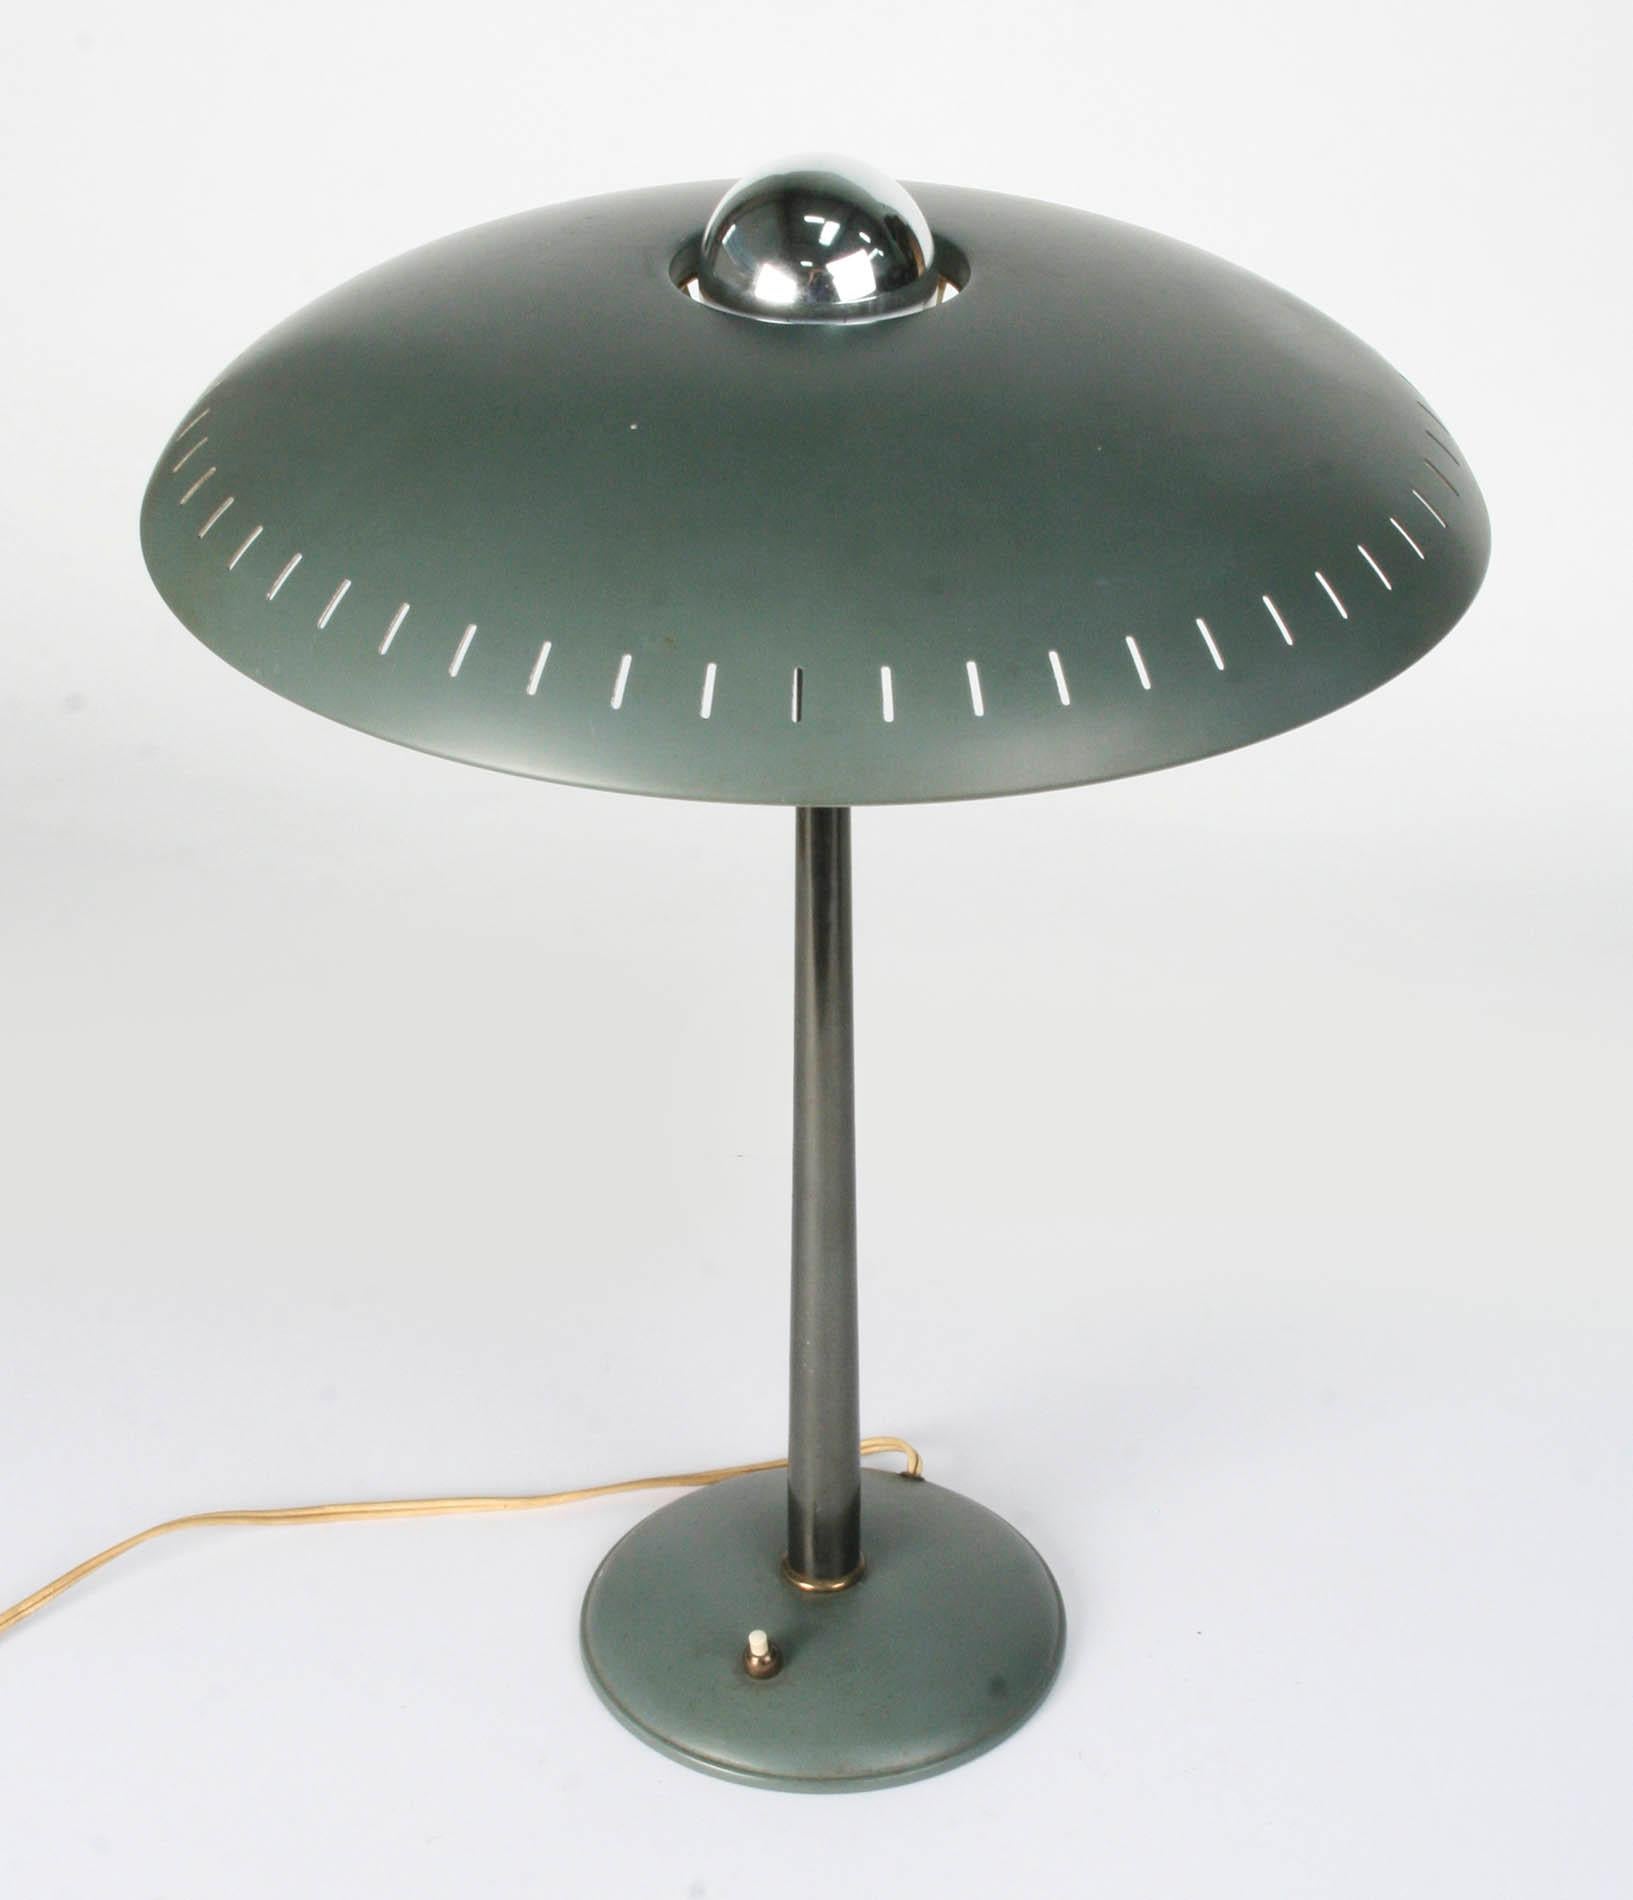 Dutch Vintage Design Table Lamp from Philips, Design by Louis Kalff, Mid-20th Century